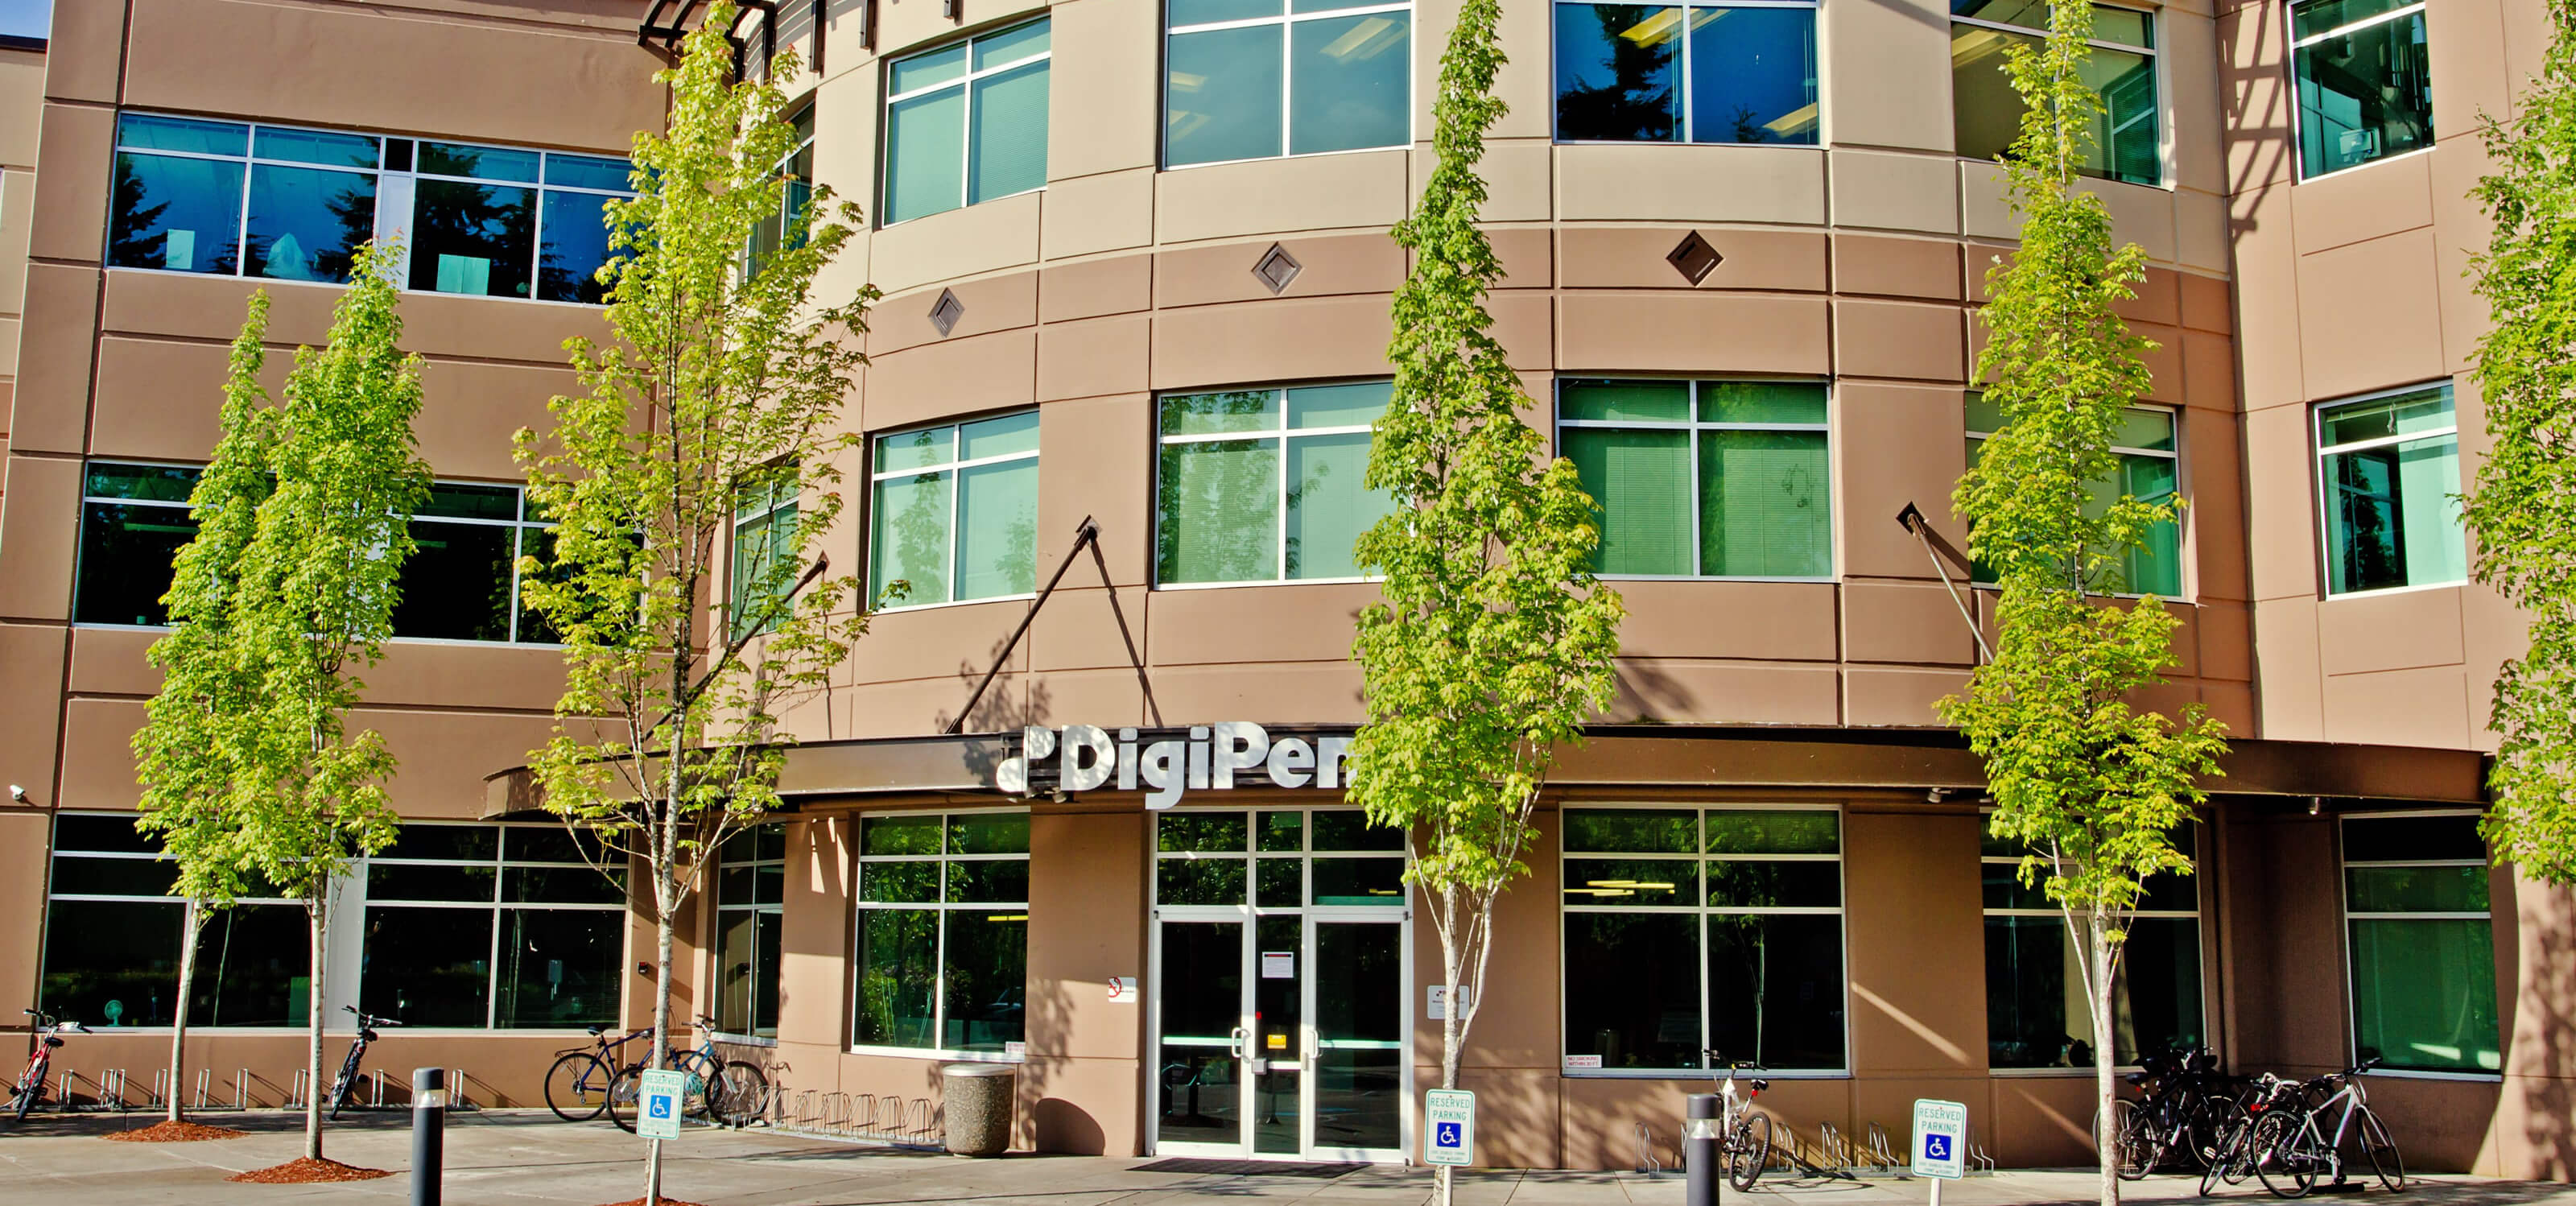 Picture of the DigiPen front entrance